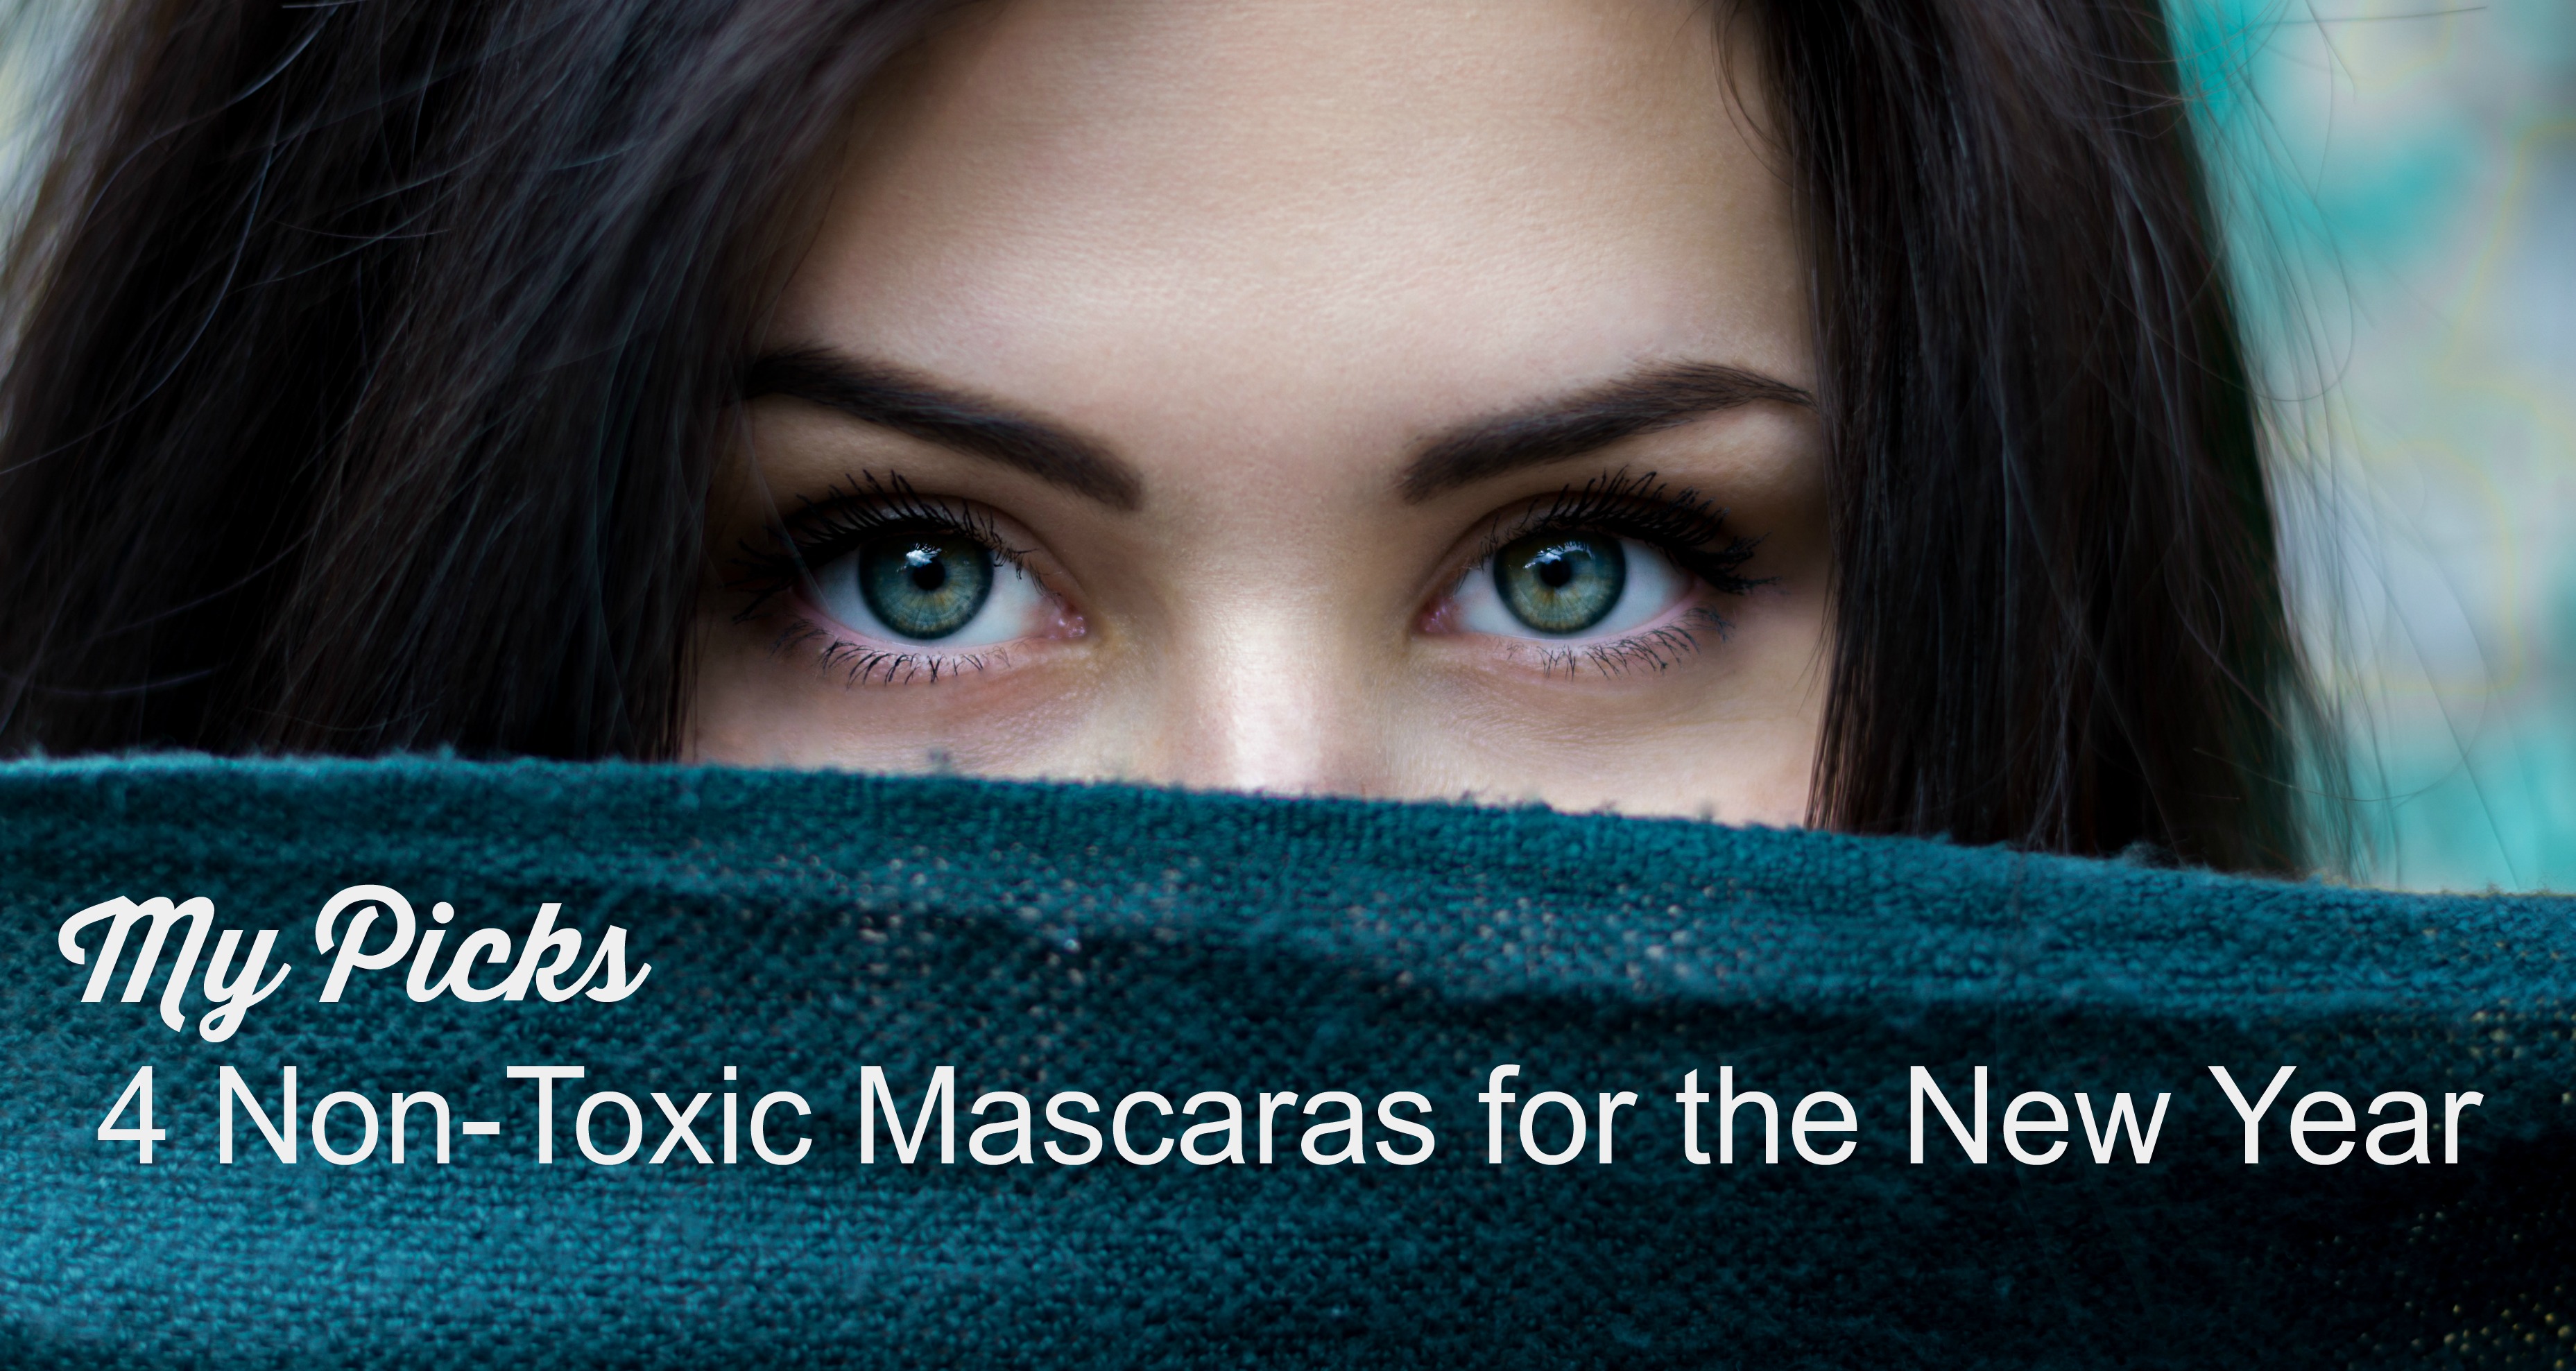 My Picks: 4 Non-Toxic Mascaras for the New Year